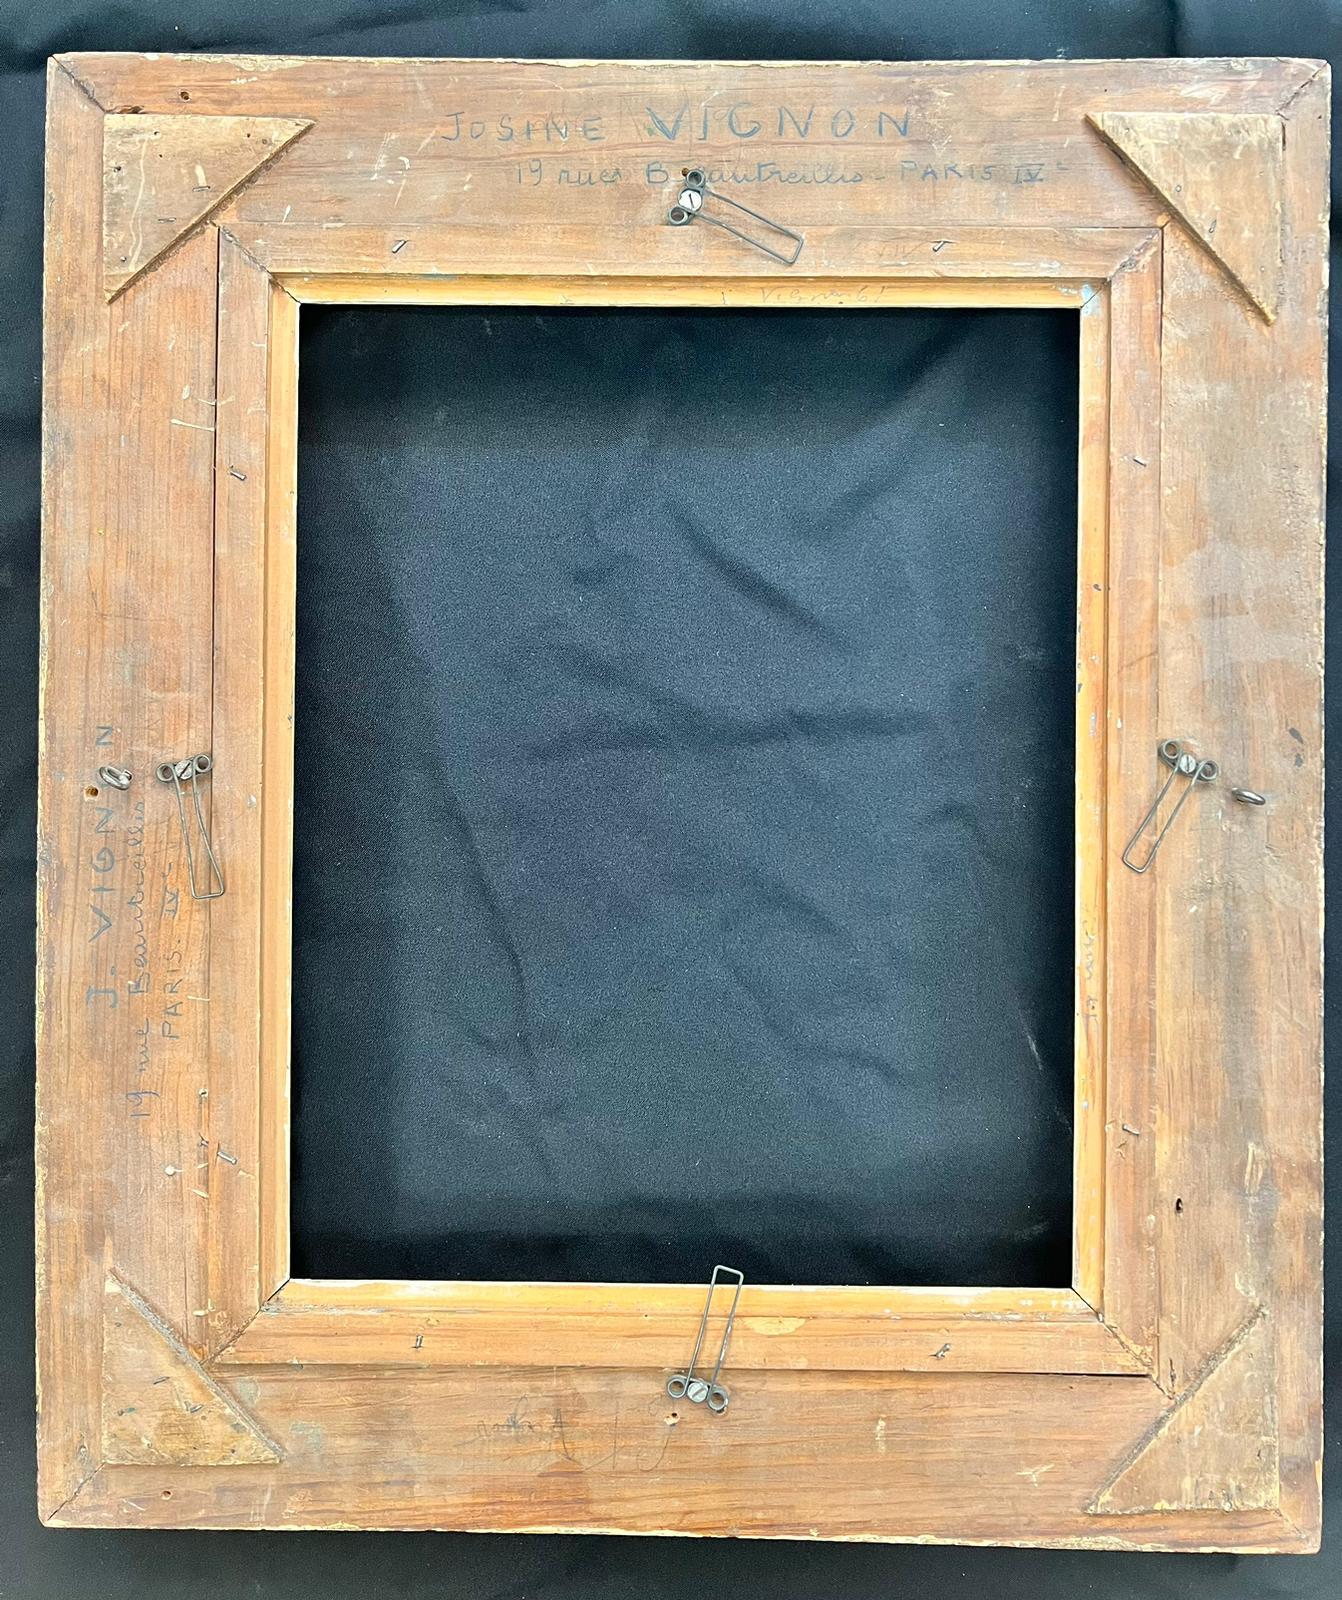 French mid 20th century
Montparnasse style picture frame
Wood and plaster 
Internal measurement (to house painting or mirror): 16 x 13 inches
Overal outer measurements: 23 x 20 inches
Provenance: from a collection in Paris
Condition: all old picture